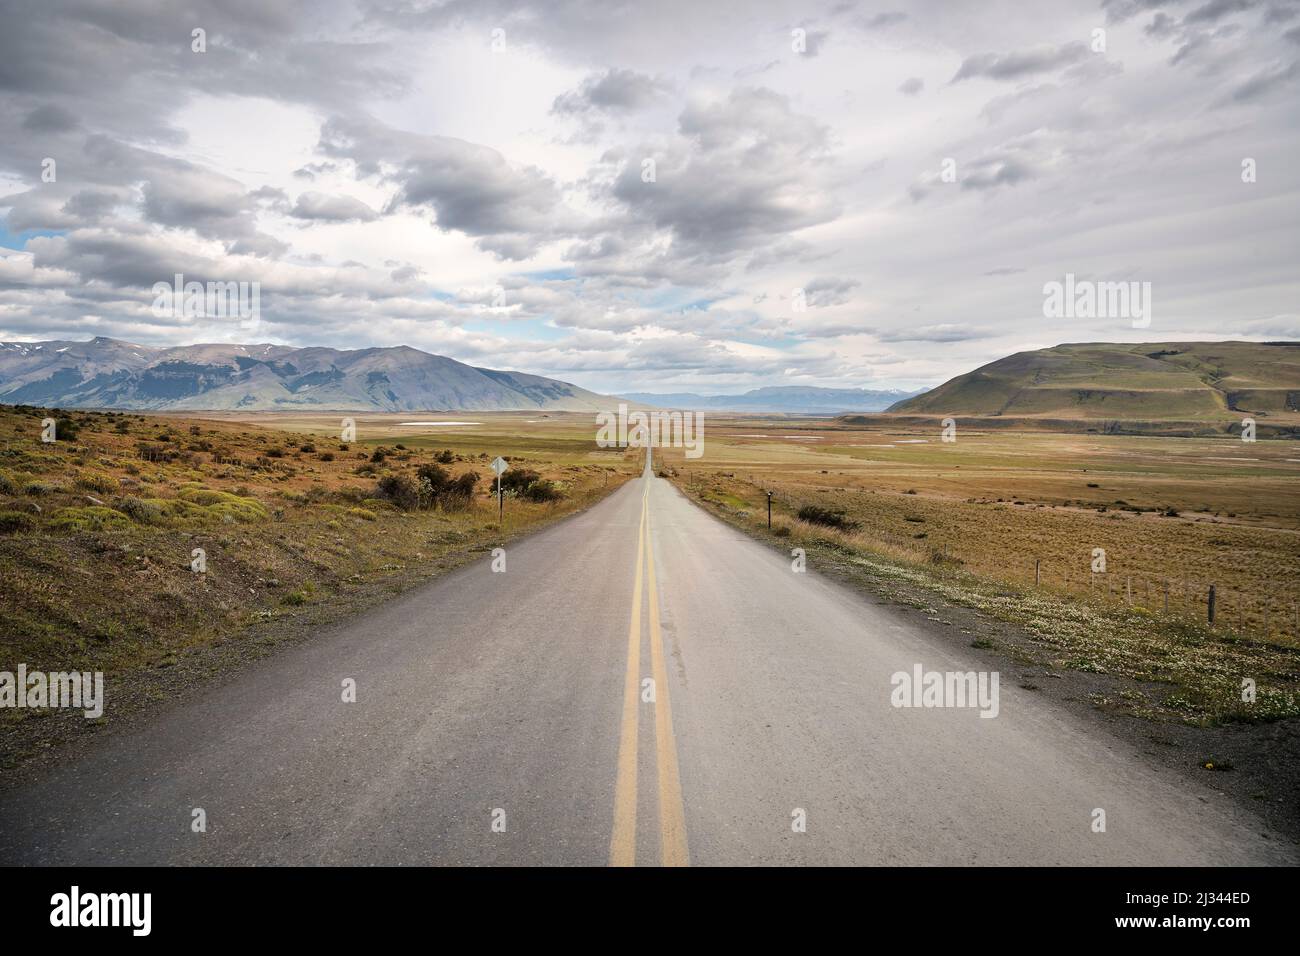 Almost endless road to the Hoirzont in Patagonia, Chile, South America Stock Photo